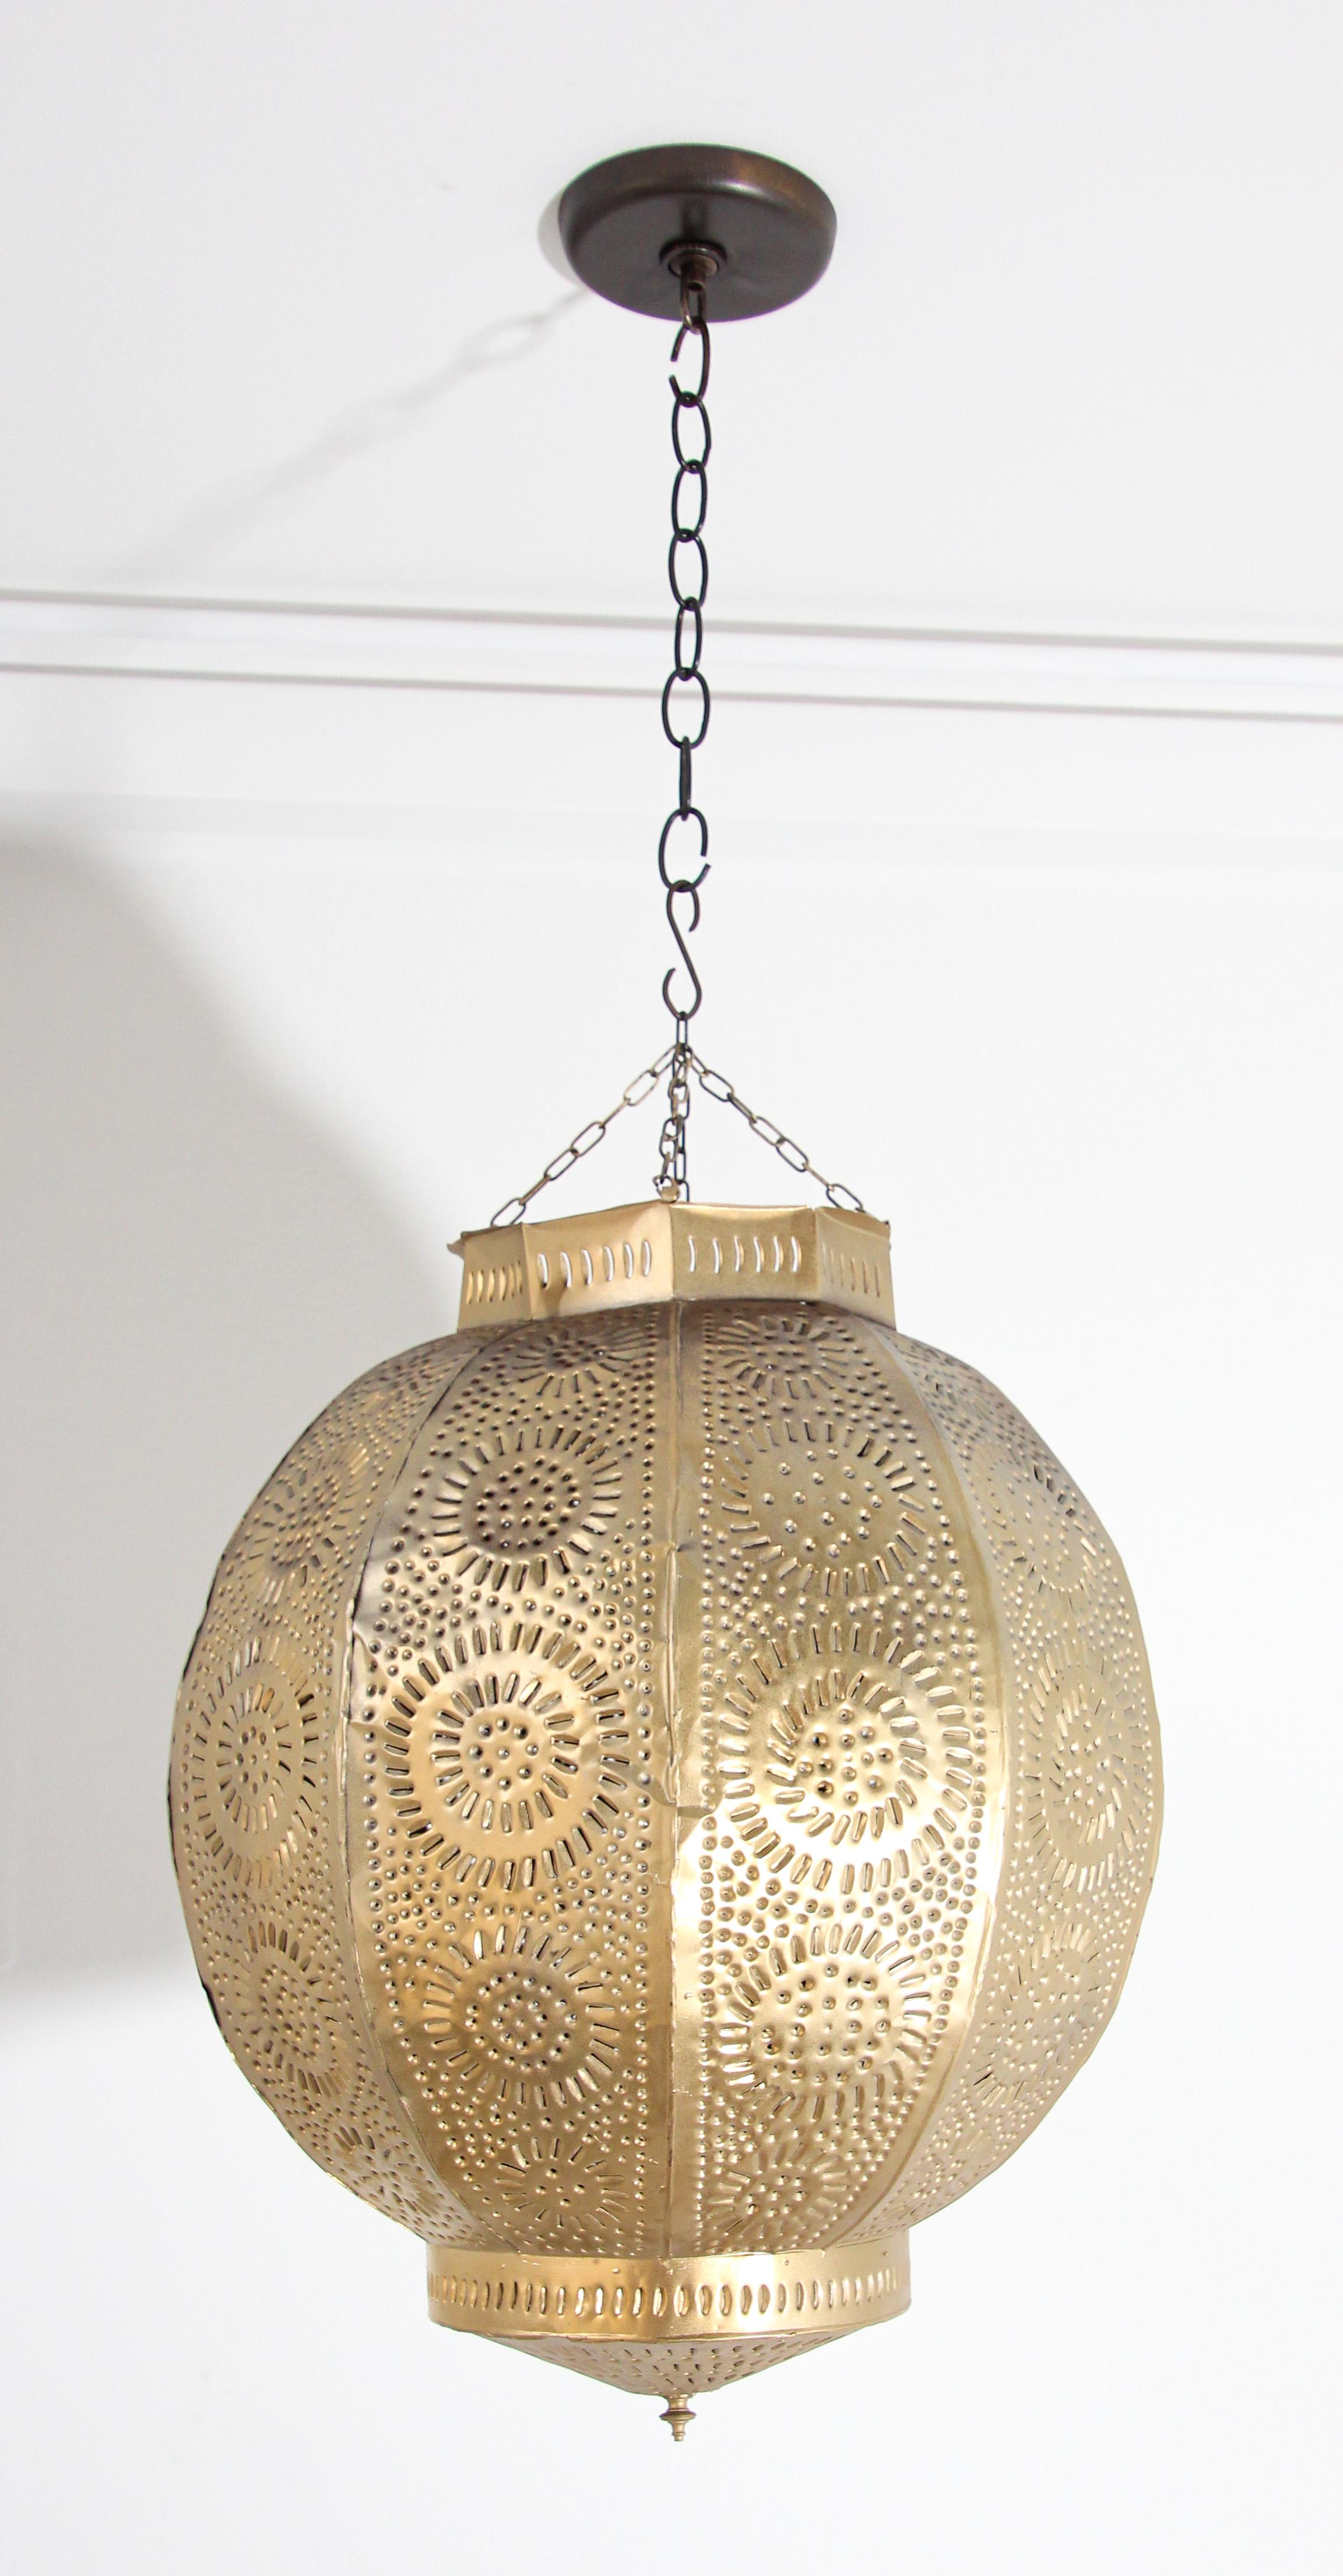 Gilt metal orb pendant handcrafted by skilled artisans in Morocco, North Africa.
Amazing metal Moroccan lantern hand-pierced with thousands of small holes to diffuse the light through.
Pomegranate shape adorned with Moorish design.
Handmade of light